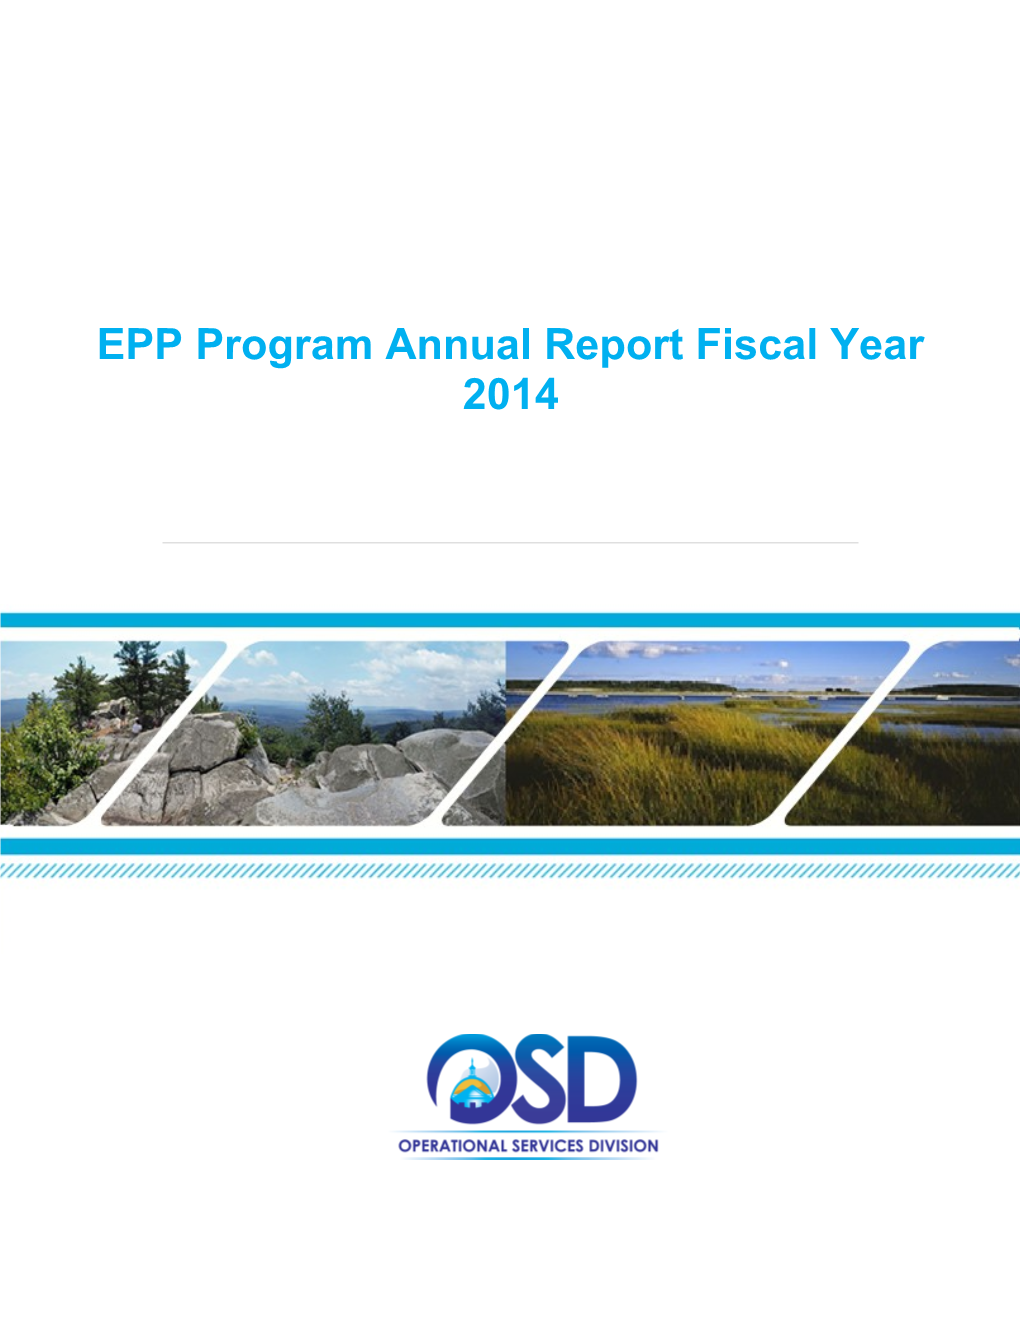 EPP Program Annual Report Fiscal Year 2014